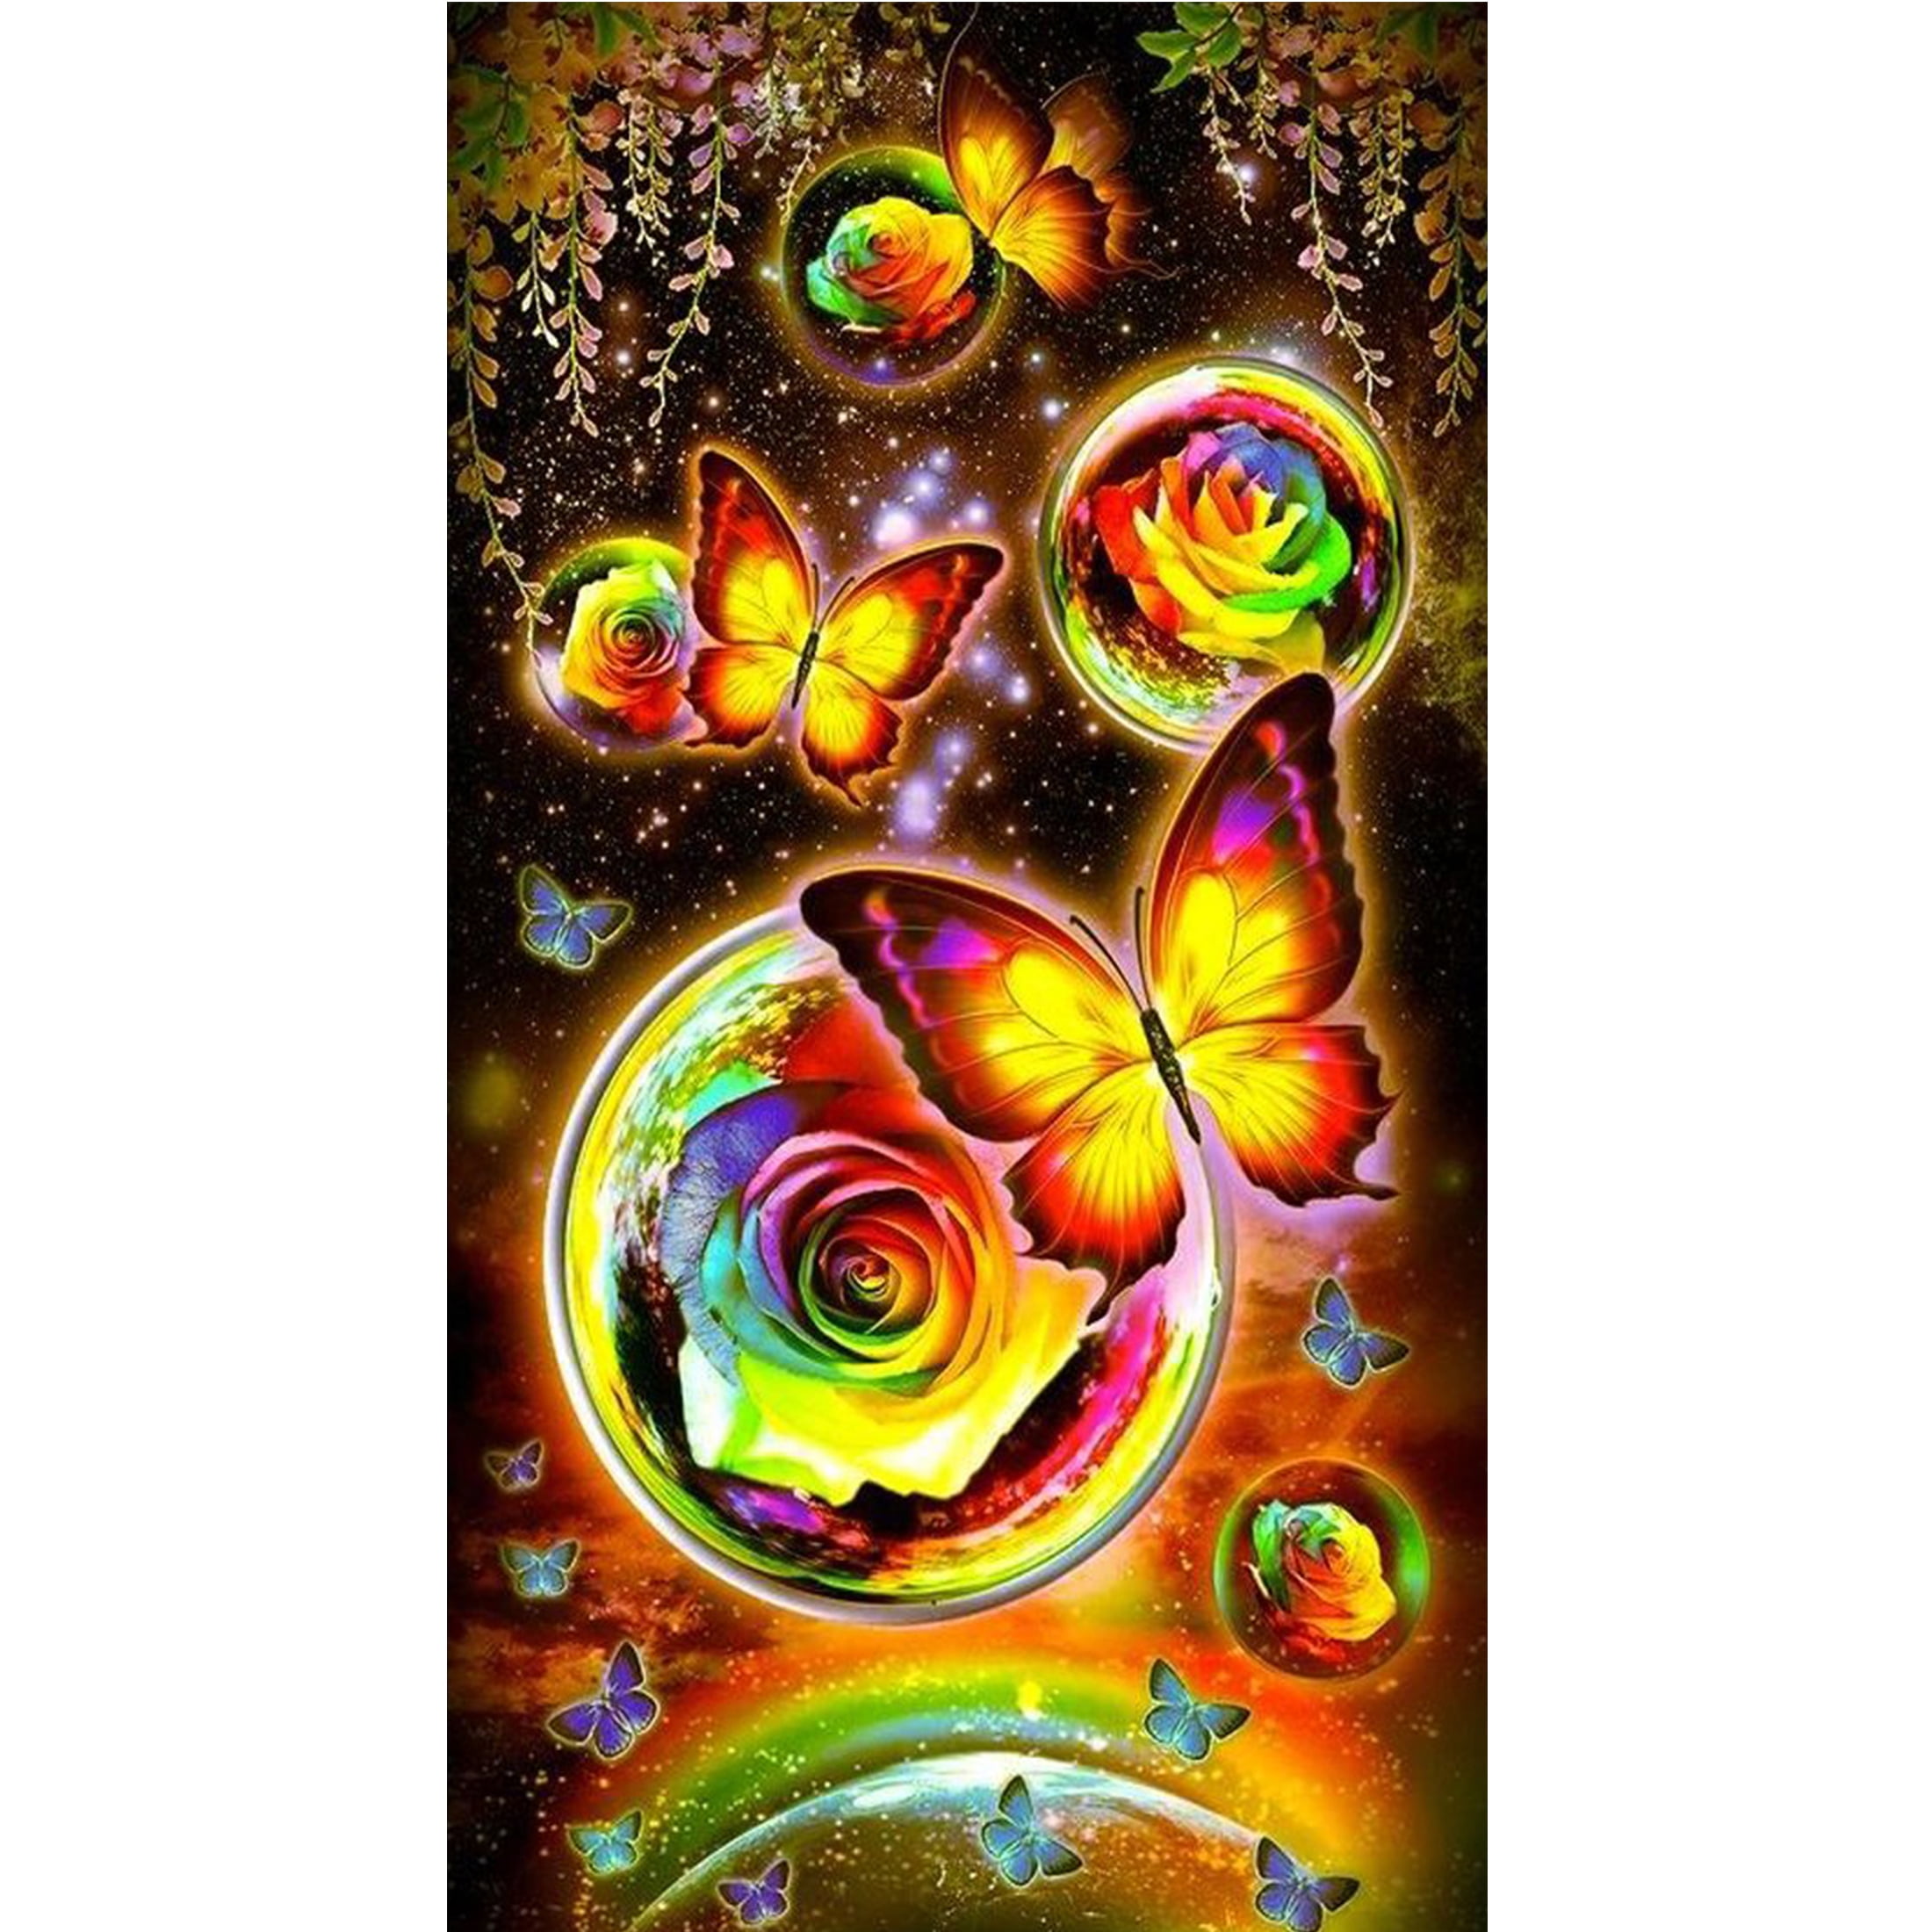 YALKIN 5D Large Diamond Painting Kits for Adults (35.4x11.8inch) DIY Forest Full Round Drill Cross Stitch for Home Wall Decor, Size: 35.4 x 11.8